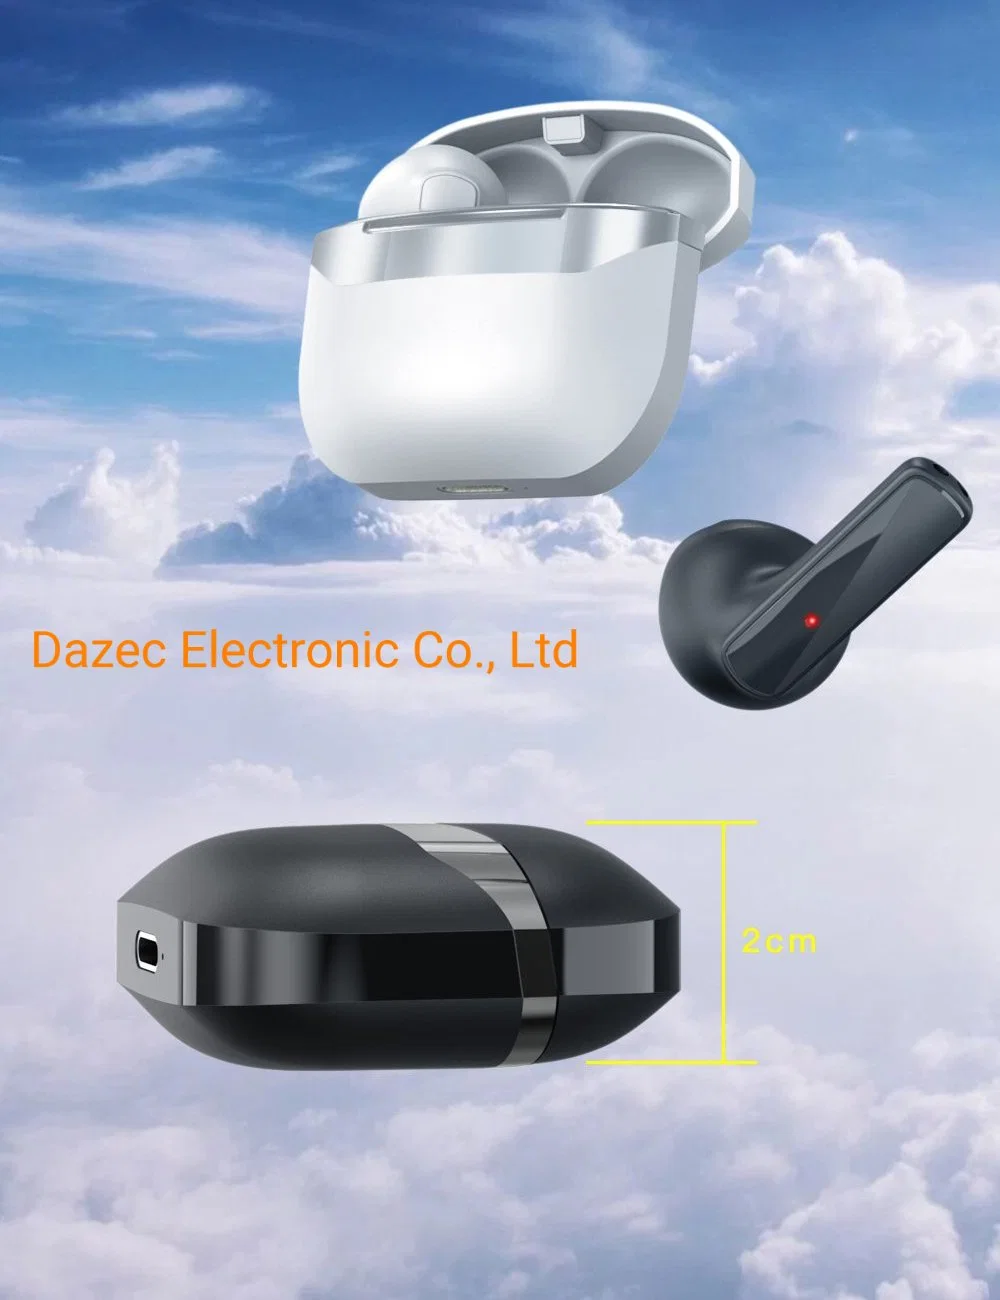 Factory Price Bluetooth 5.1 Type Earphones 6 Mics Anc and Enc, Bluetooth Earbuds with Charging Case for Mobile Phone Calling Earbuds Earphone